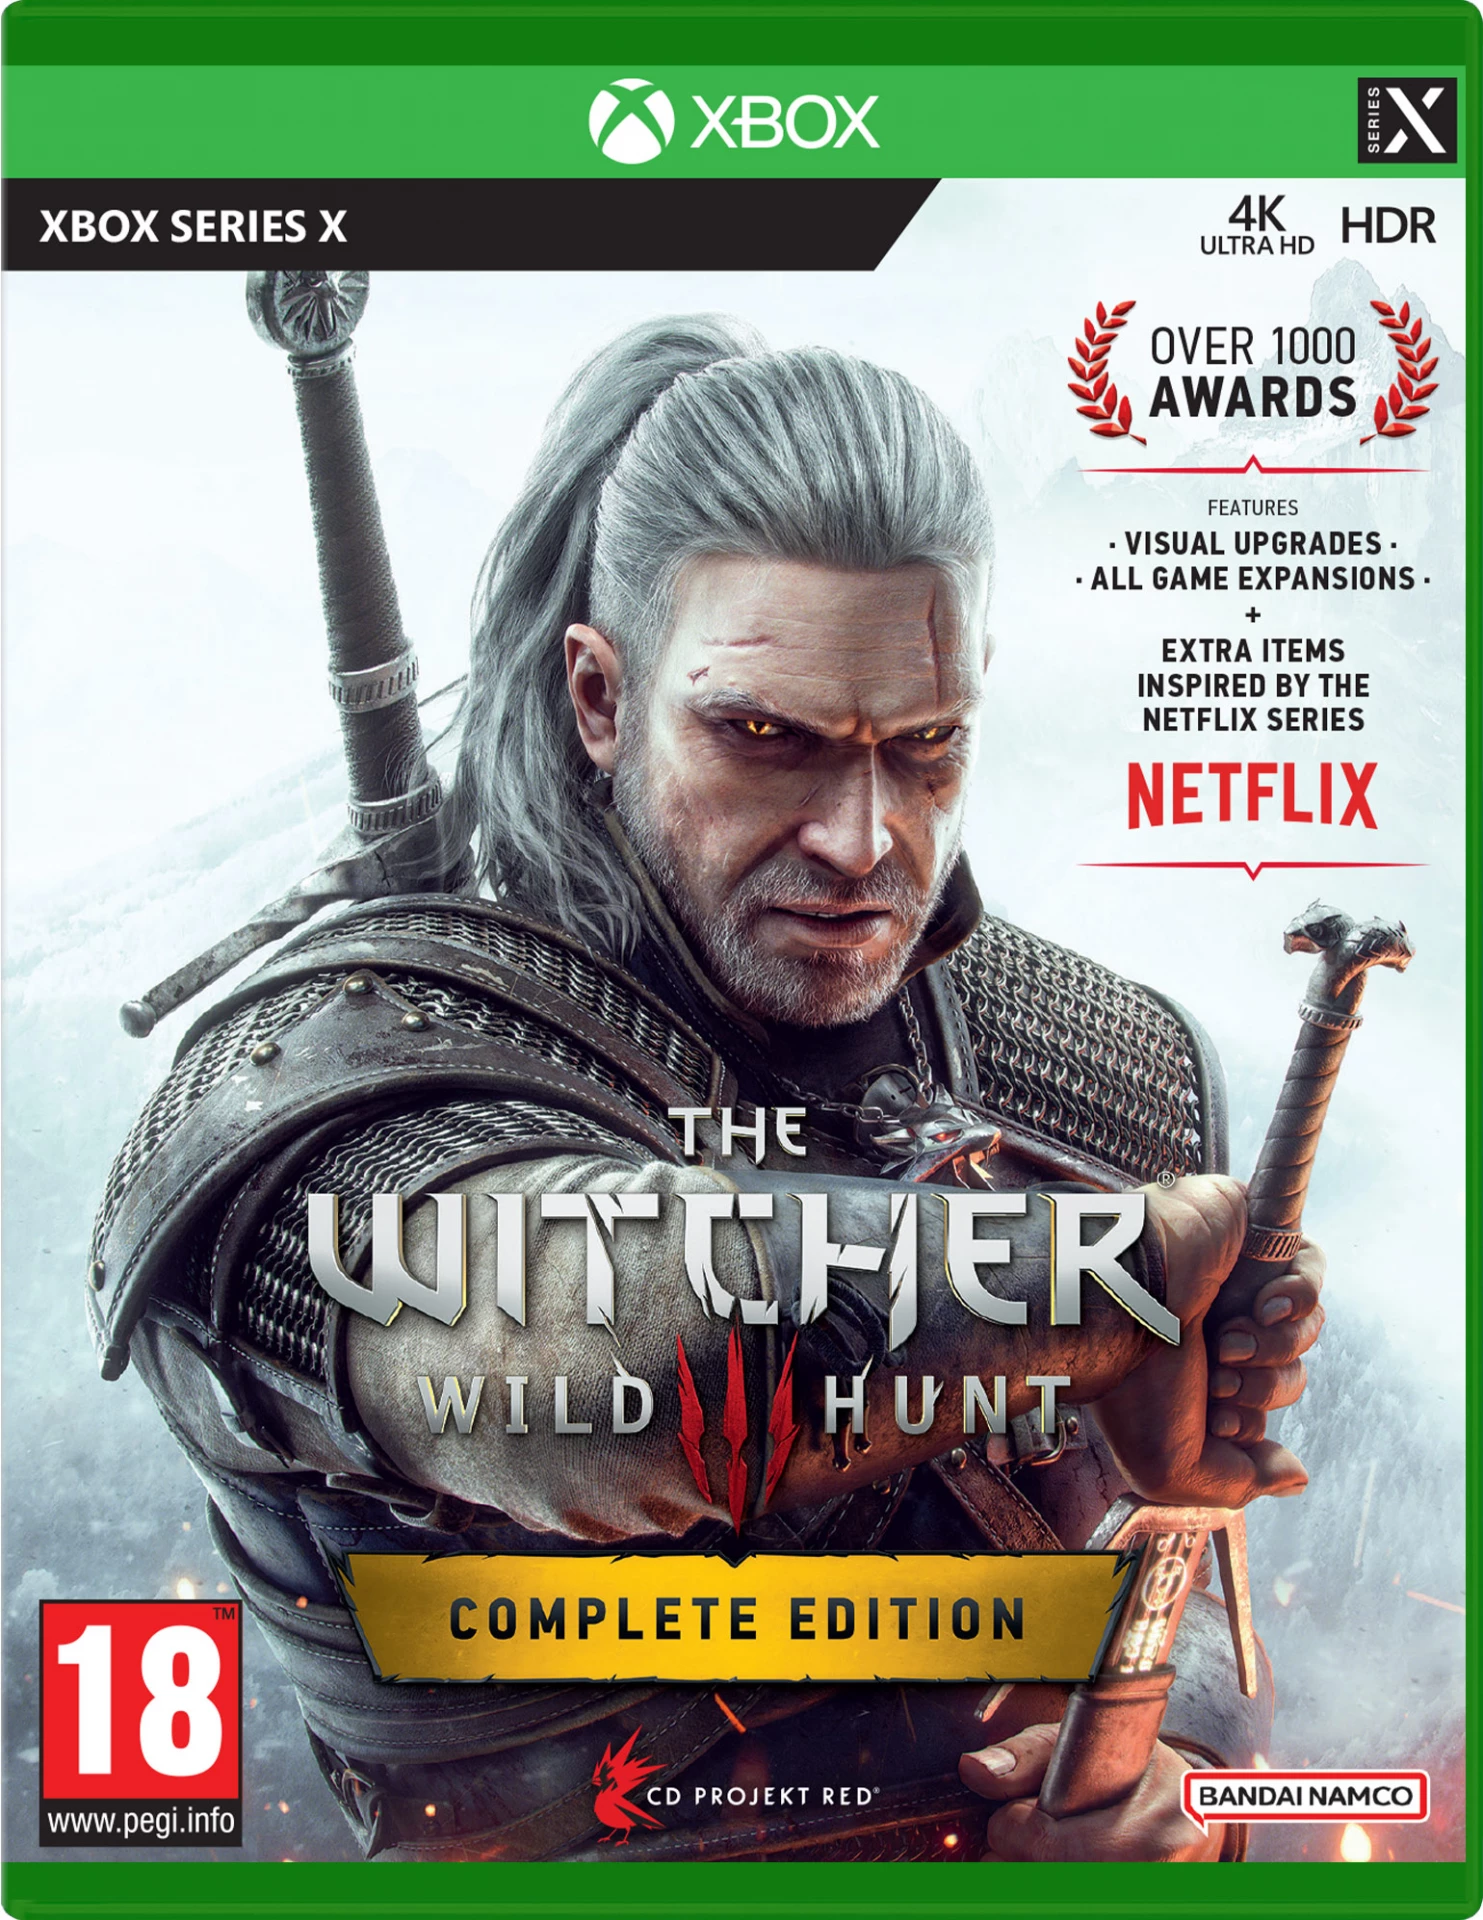 The Witcher 3: Wild Hunt - Complete Edition (Xbox Series X), CD Projekt Red